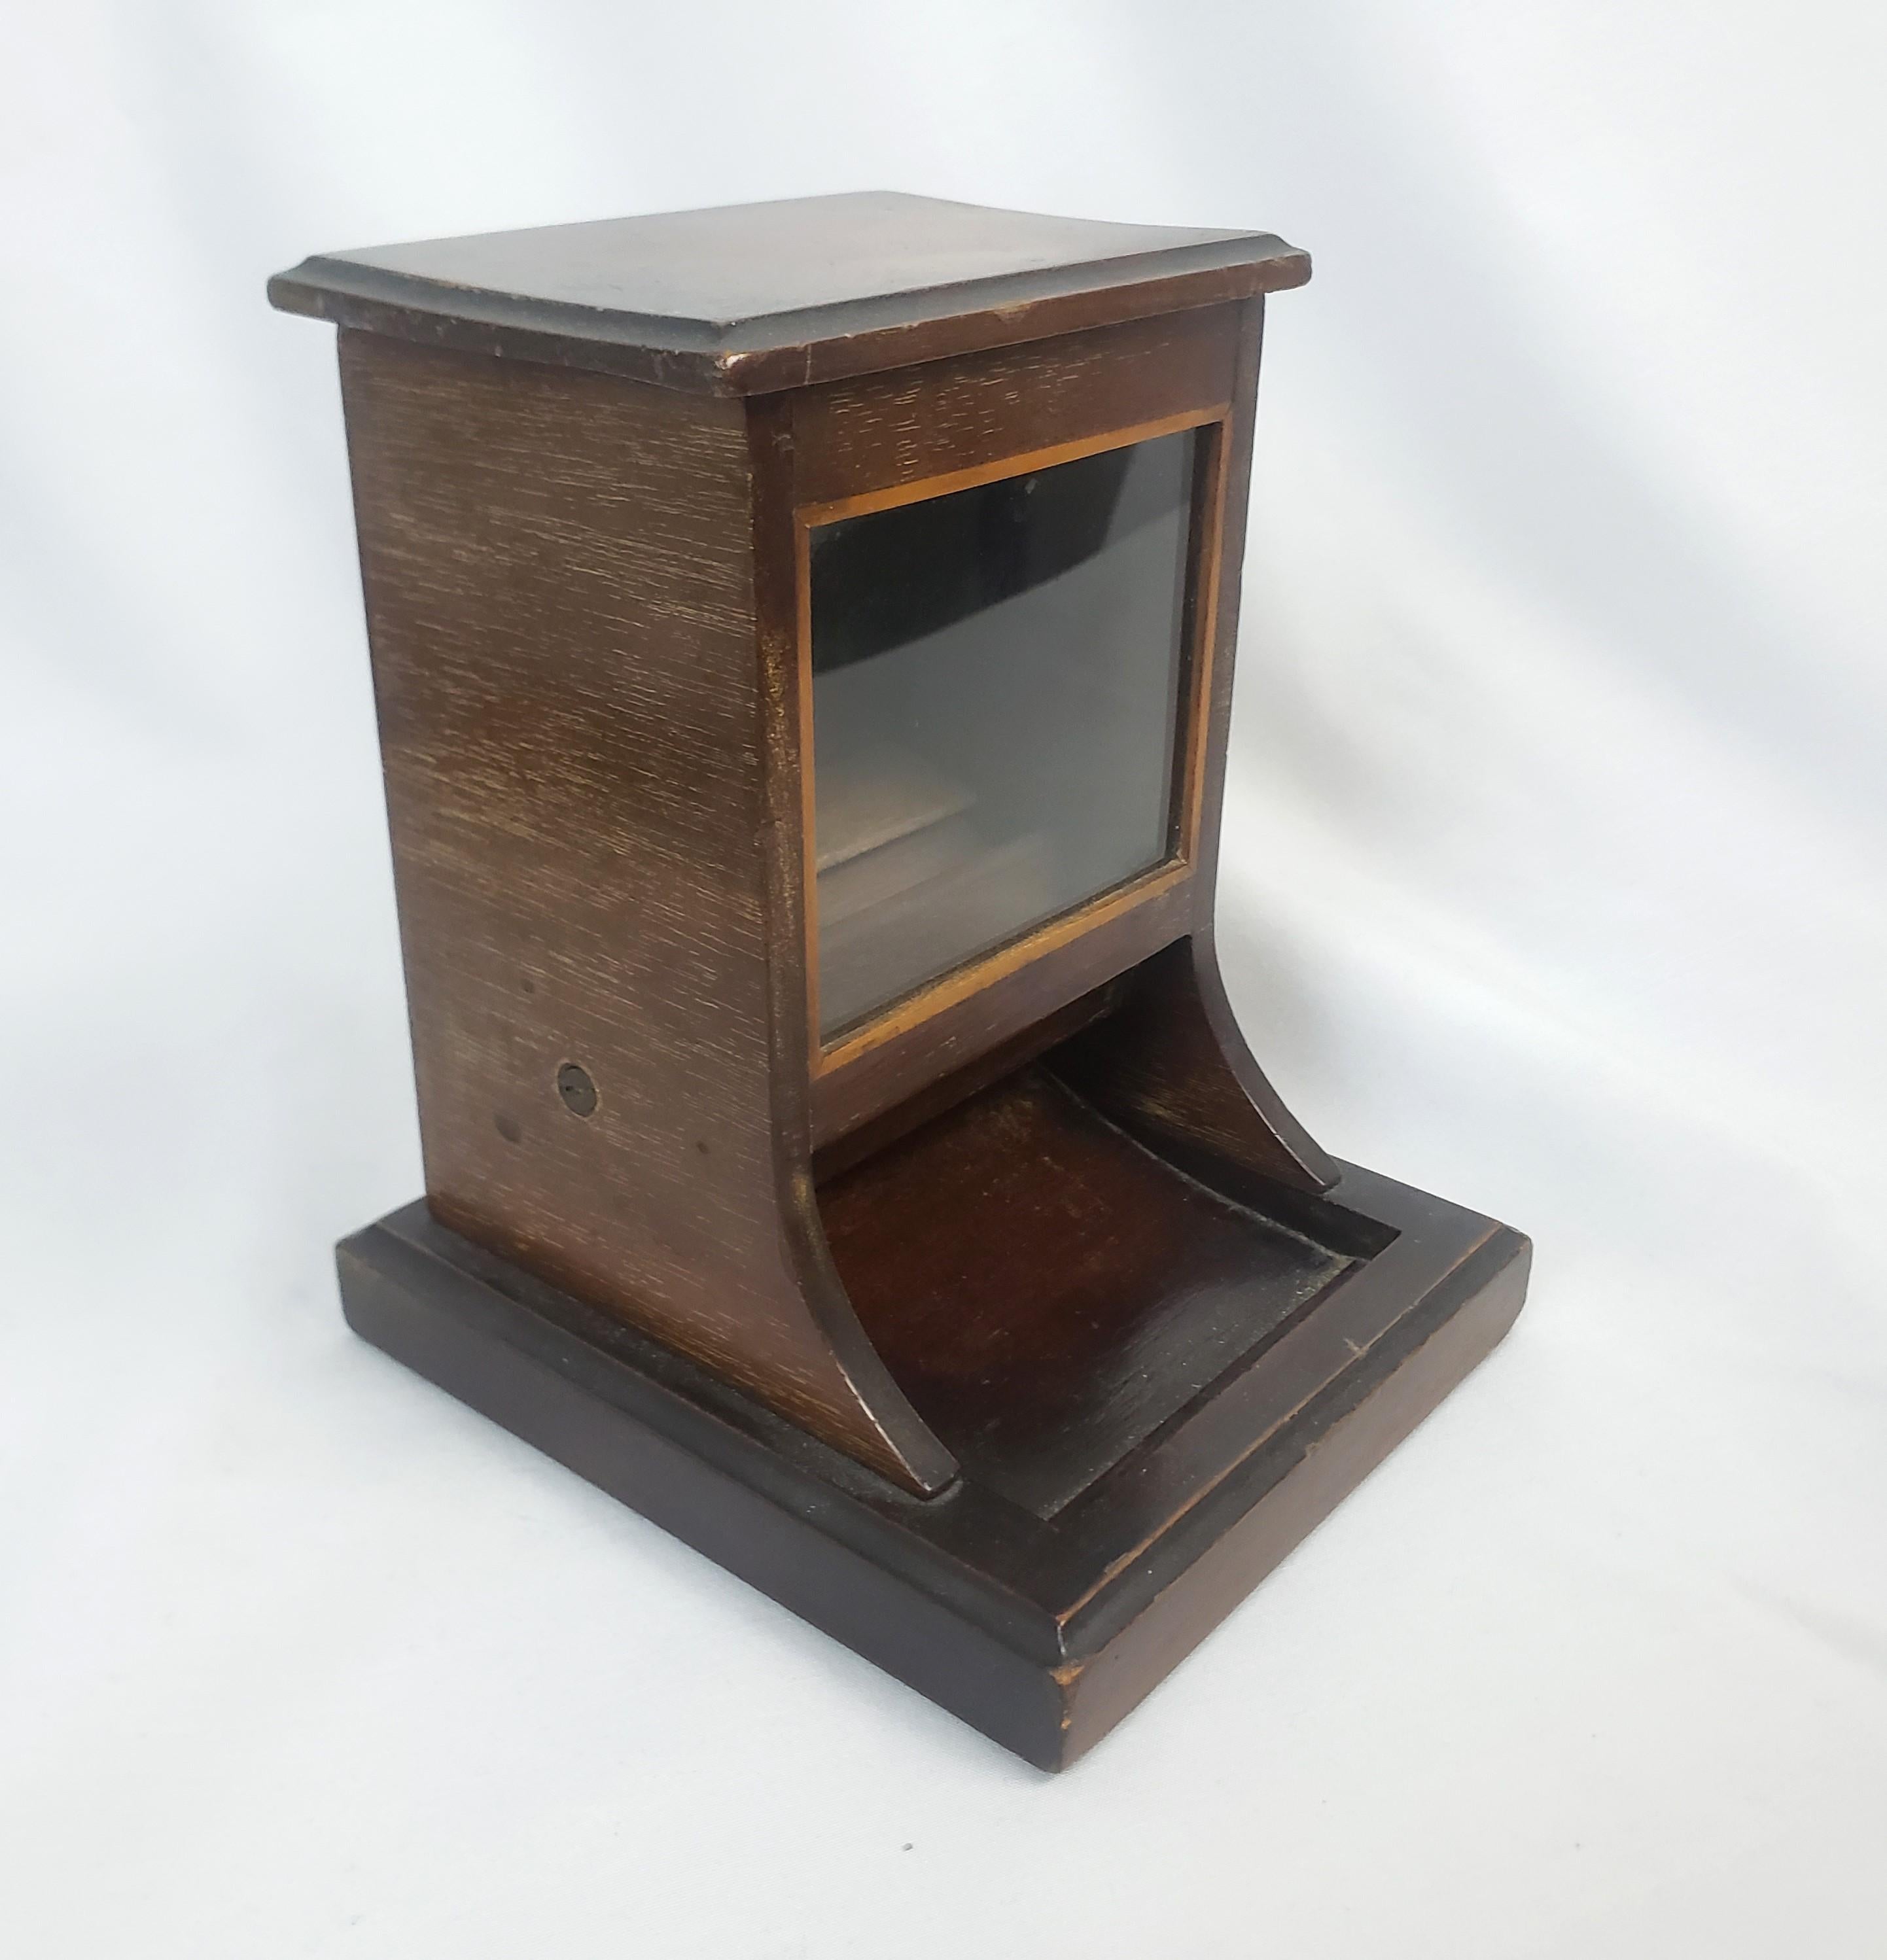 This antique table top cigarette dispenser was made by the renowned Dunhill firm of England and dates to approximately 1920 and done in the period Art Deco style. The dispenser is composed of wood with a glass front window and a slide closure top.